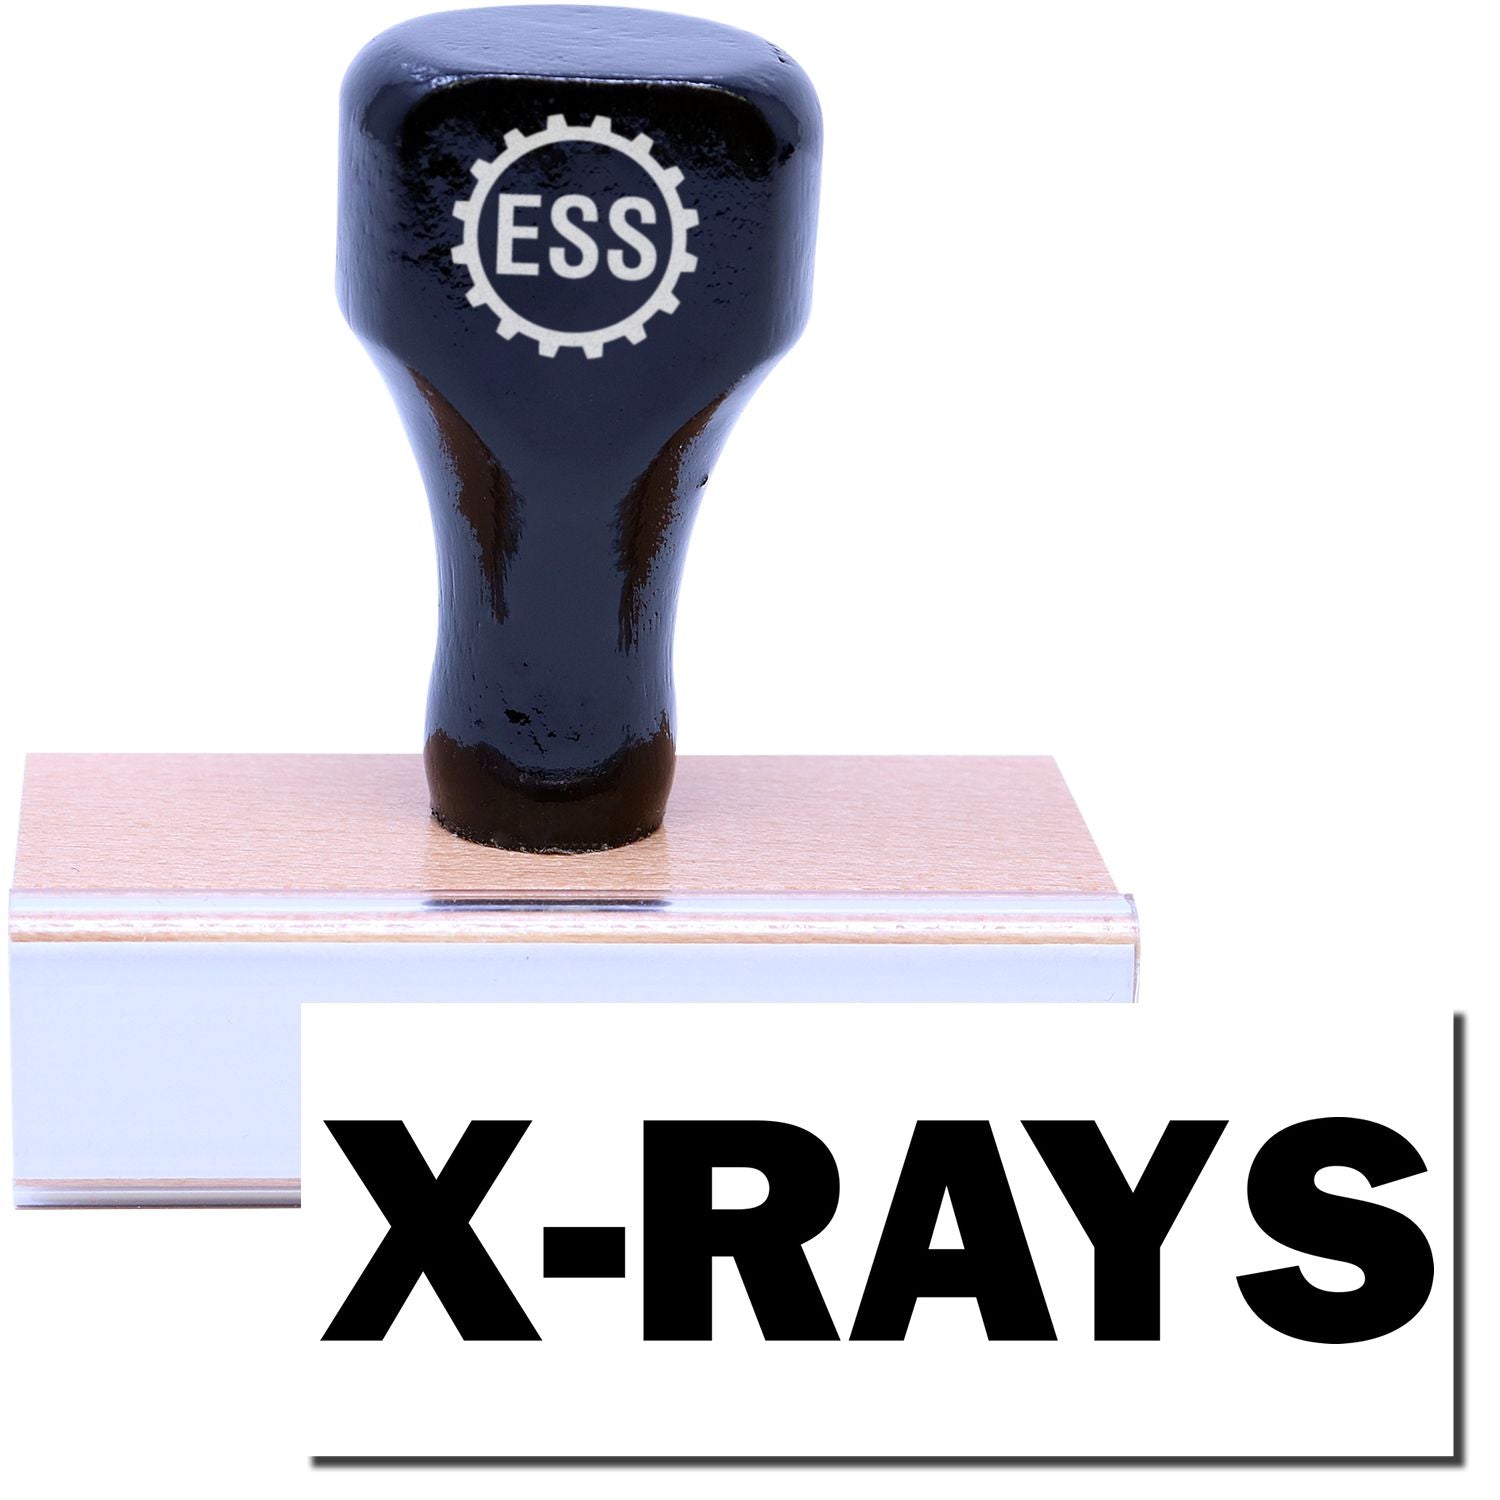 A stock office rubber stamp with a stamped image showing how the text "X-RAYS" in a large font is displayed after stamping.